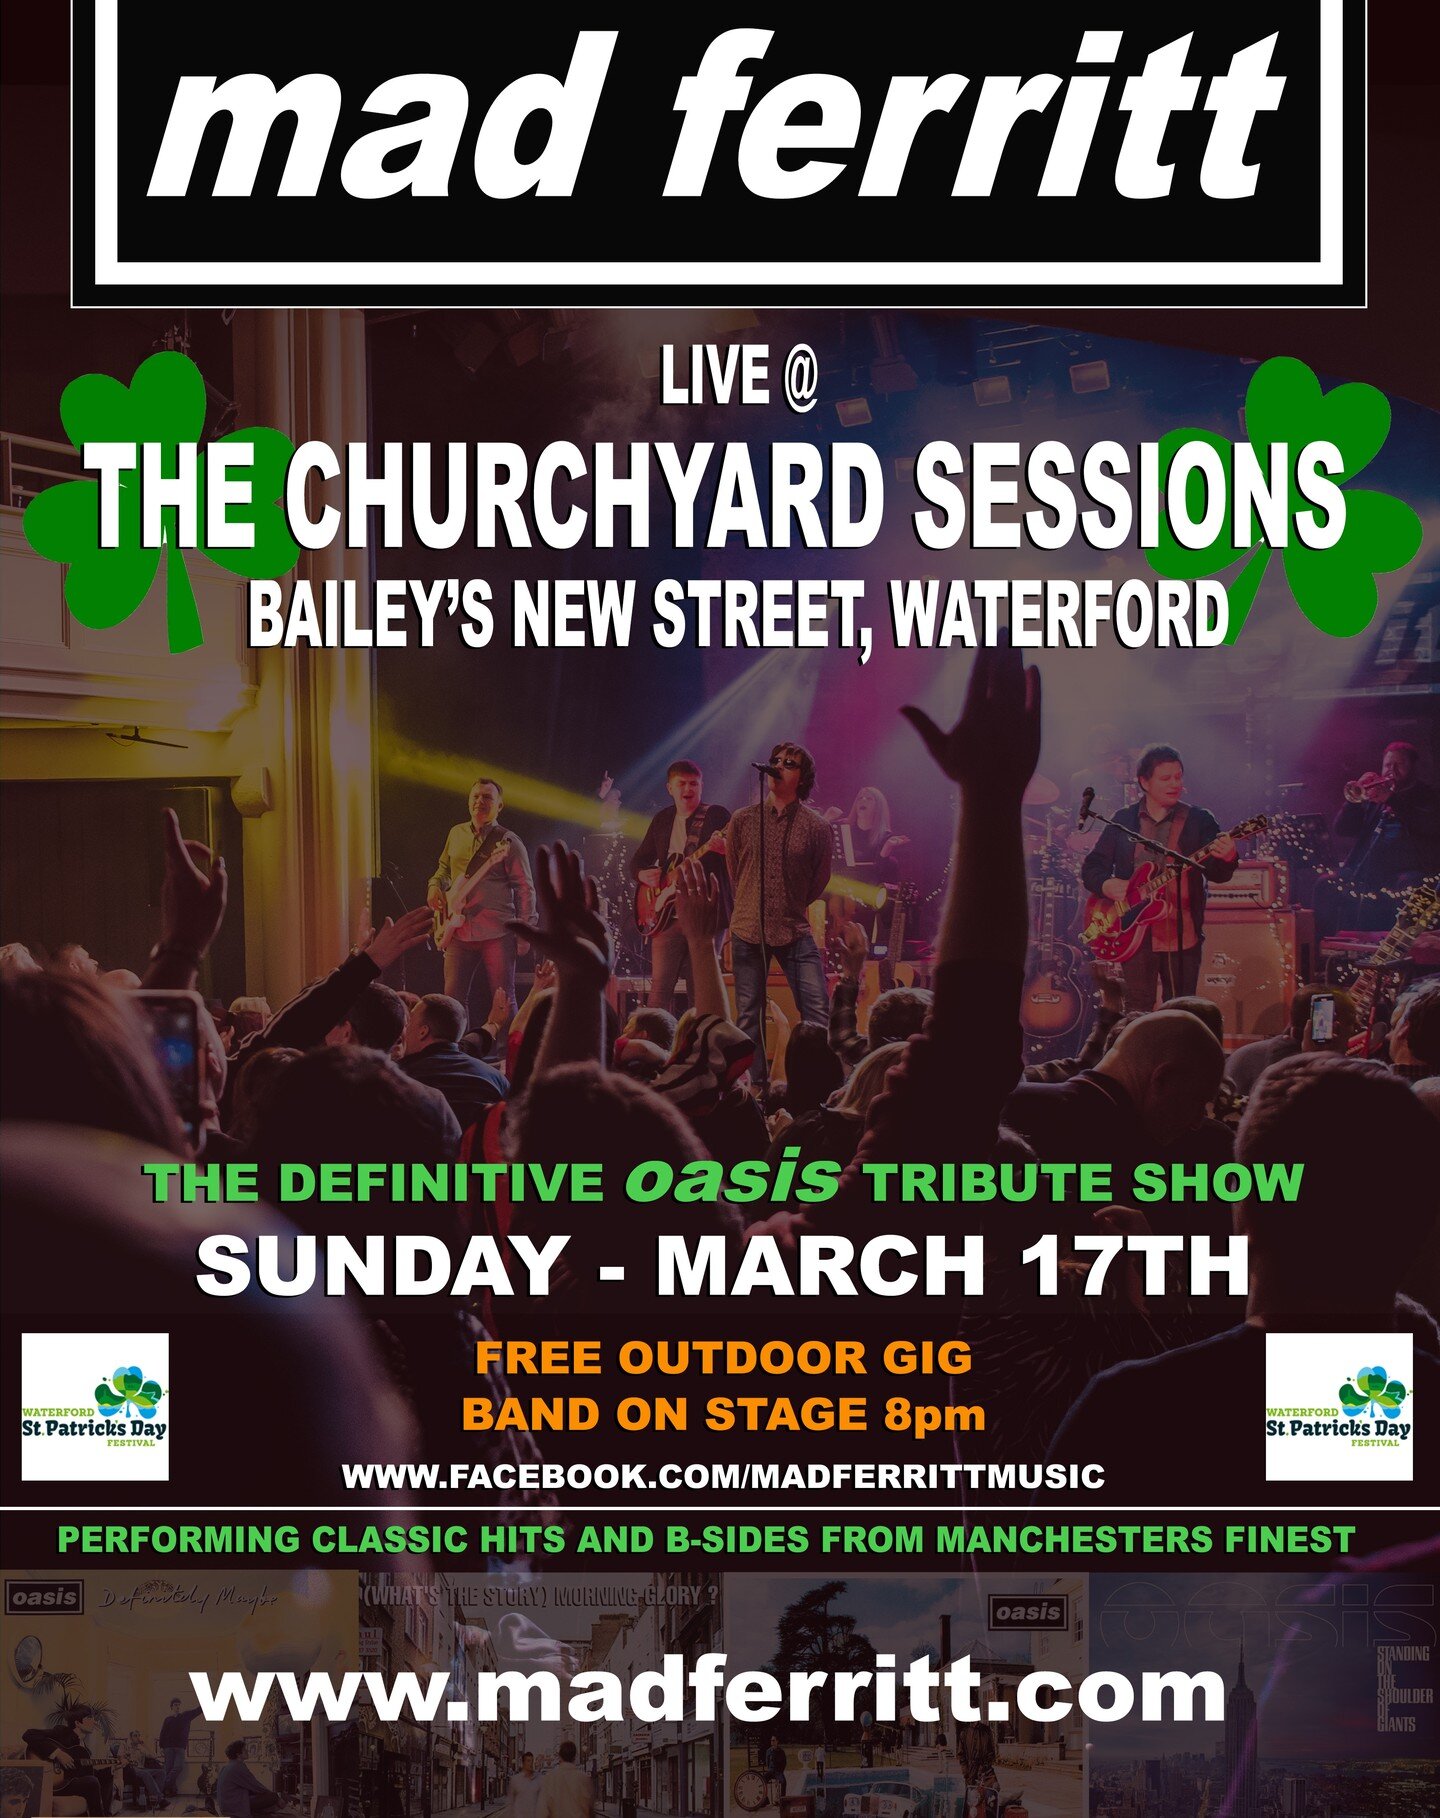 PADDY'S DAY GIG ALERT 🇮🇪☘️🎸

We're delighted to announce that we will be part of the upcoming @stpatricksdaywat festival by performing our tribute show live @thechurchyardsessions on Bailey's New Street at 8pm on Sunday 17th of March. This is a fr